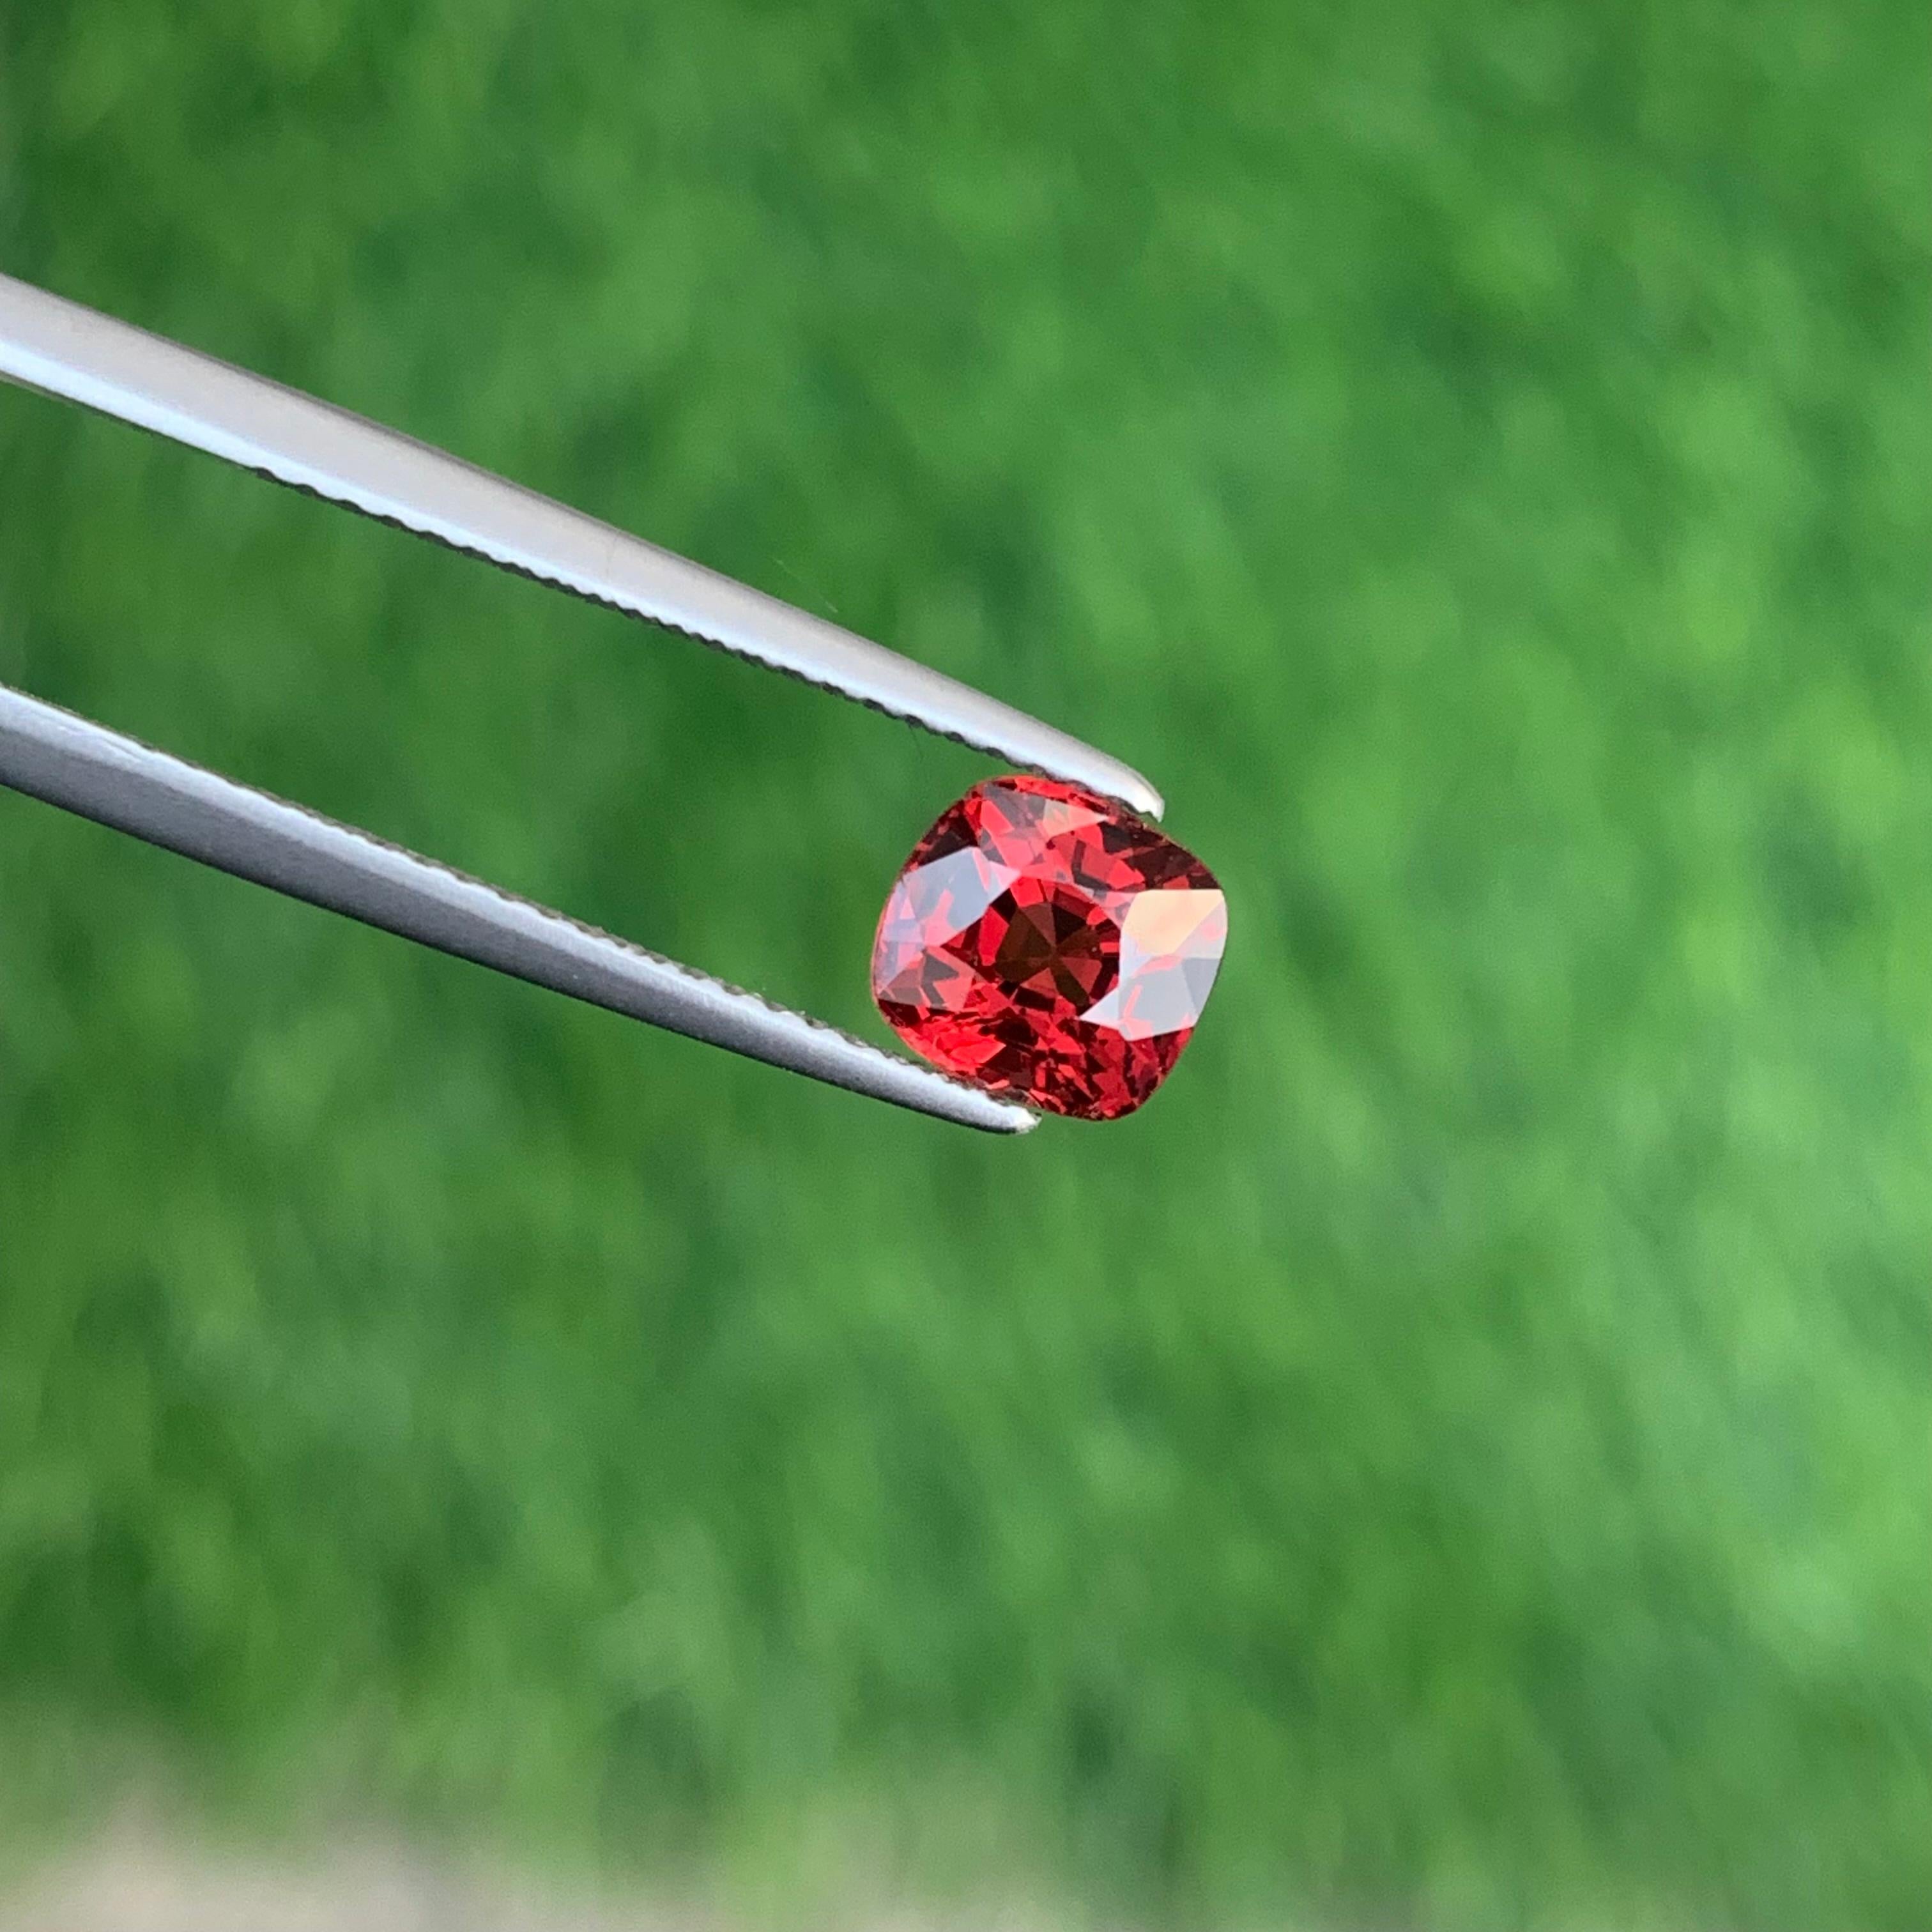 GGI Certified 1.05 Carat Faceted Red Spinel From Myanmar, Loose Burmese Spinel For Sale 2